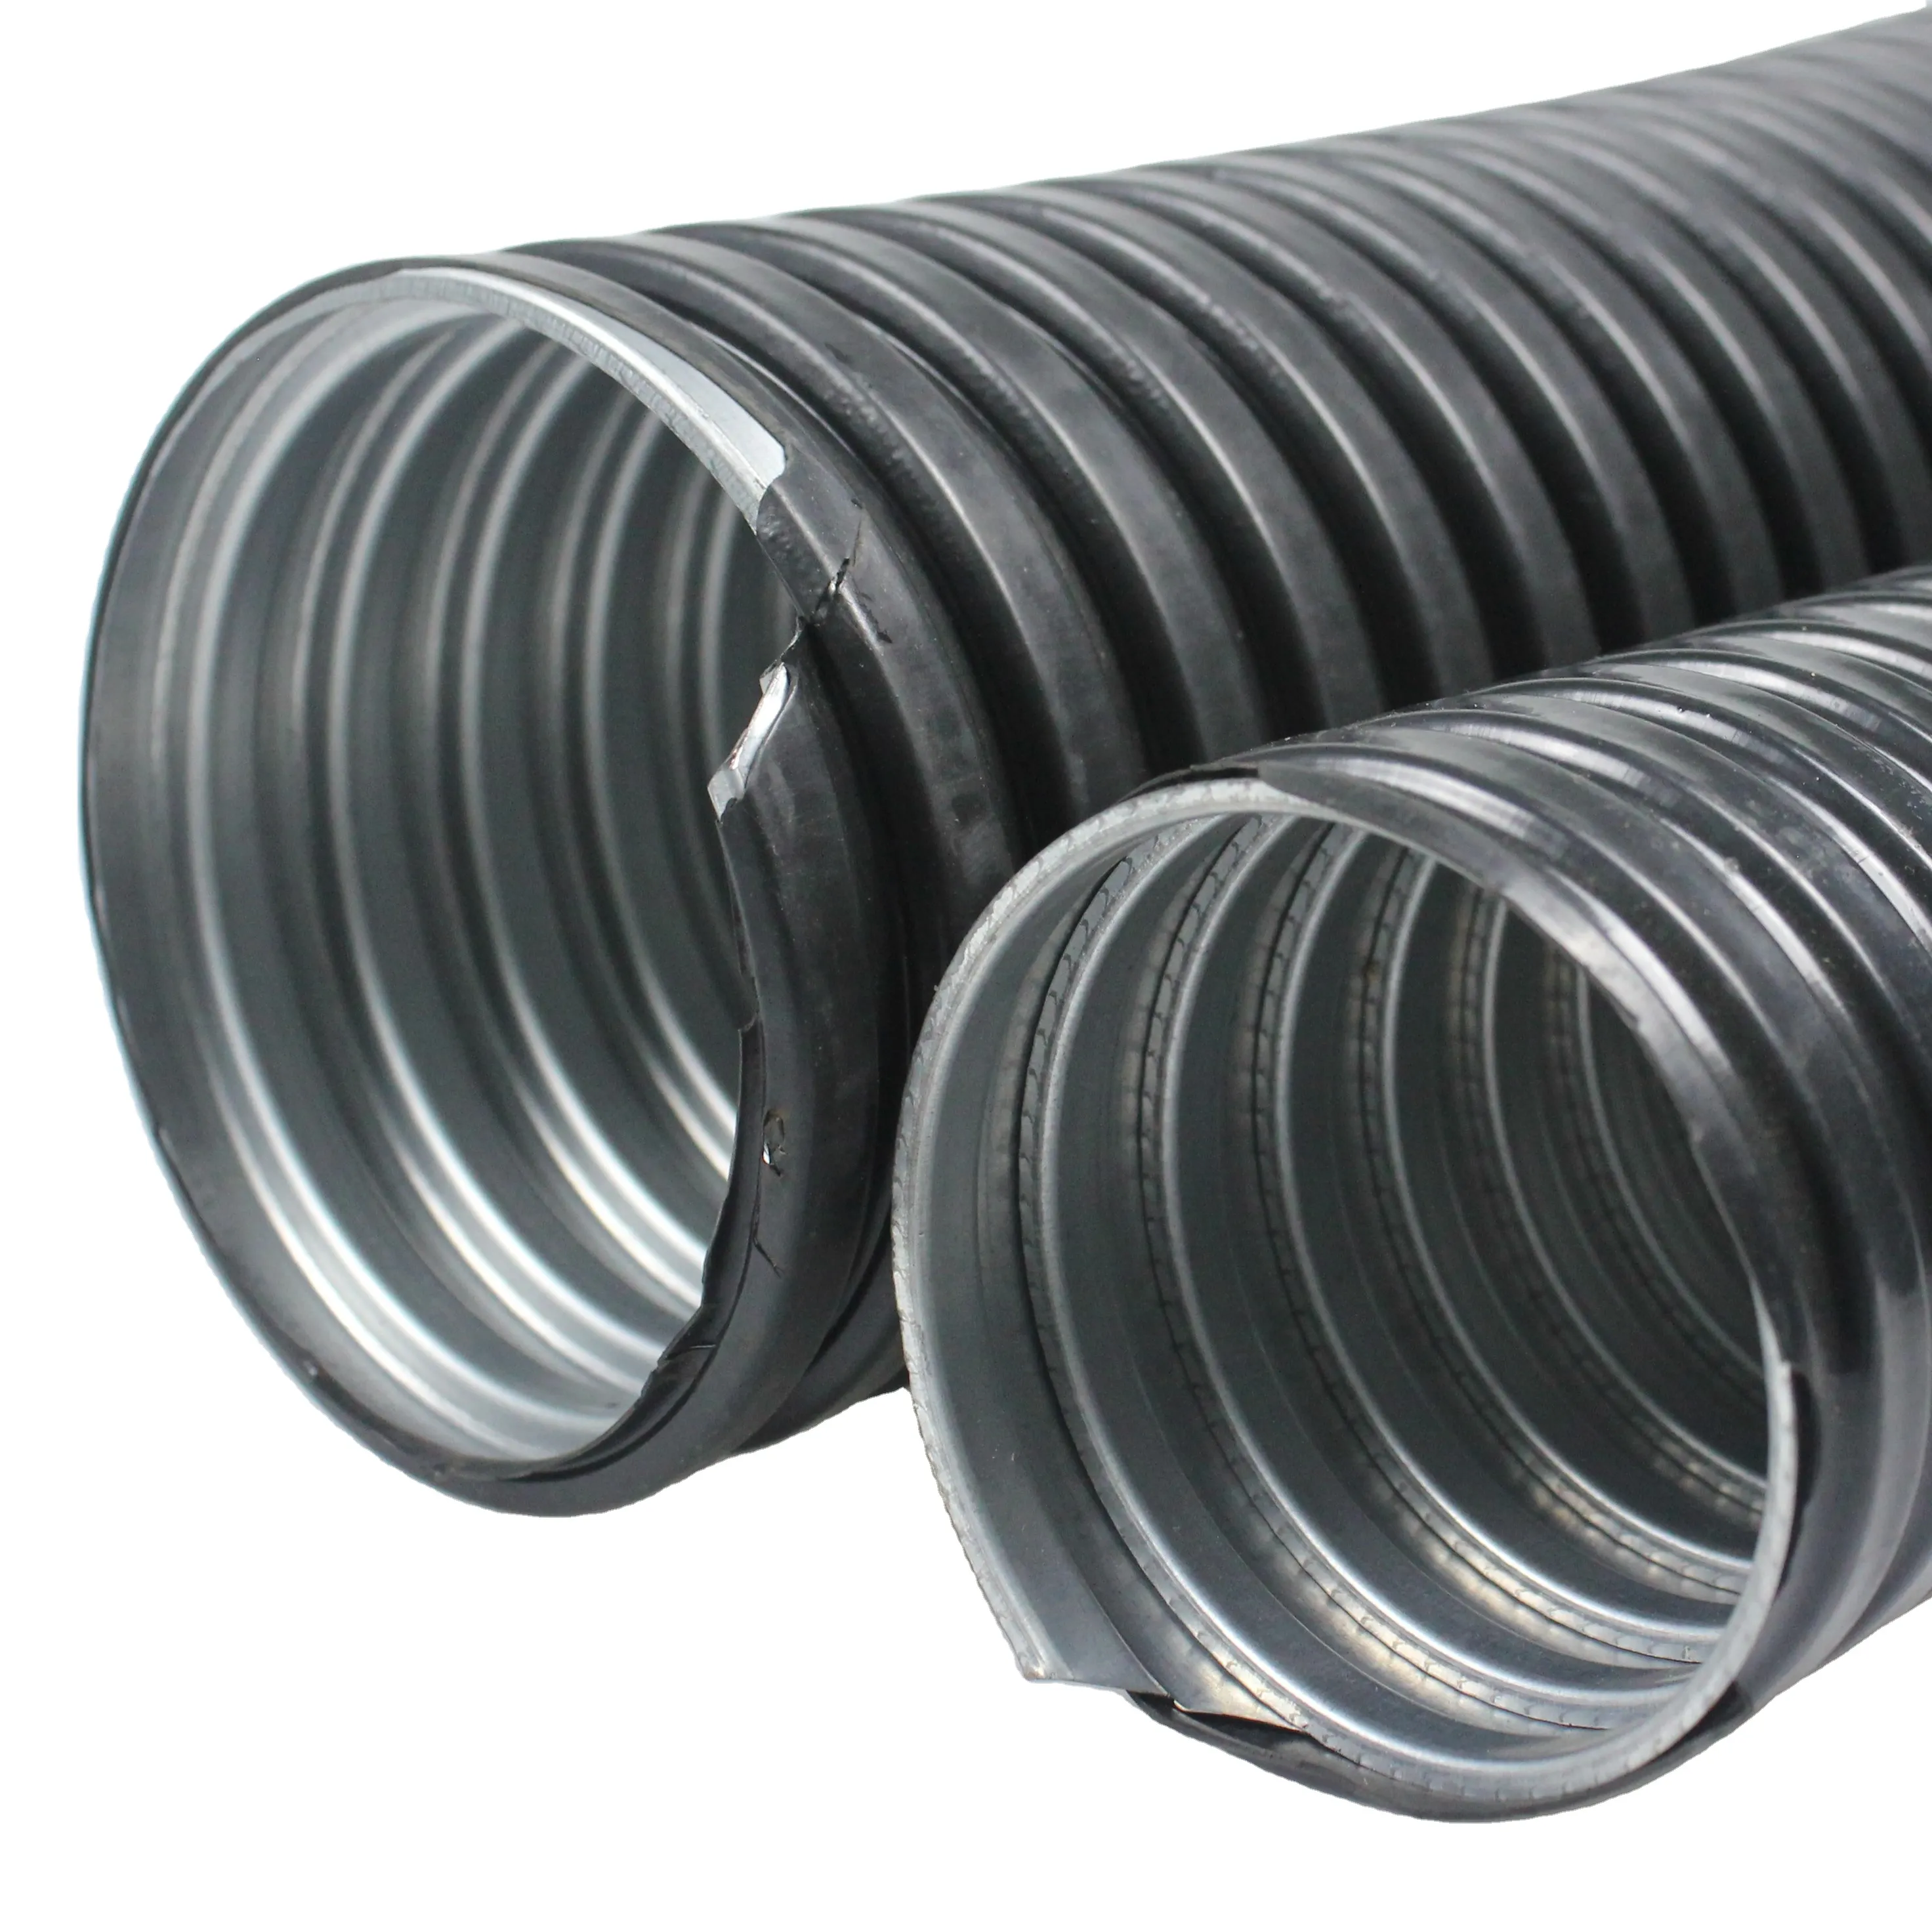 Low price high quality electrical plastic PVC coated metal flexible pipe conduit